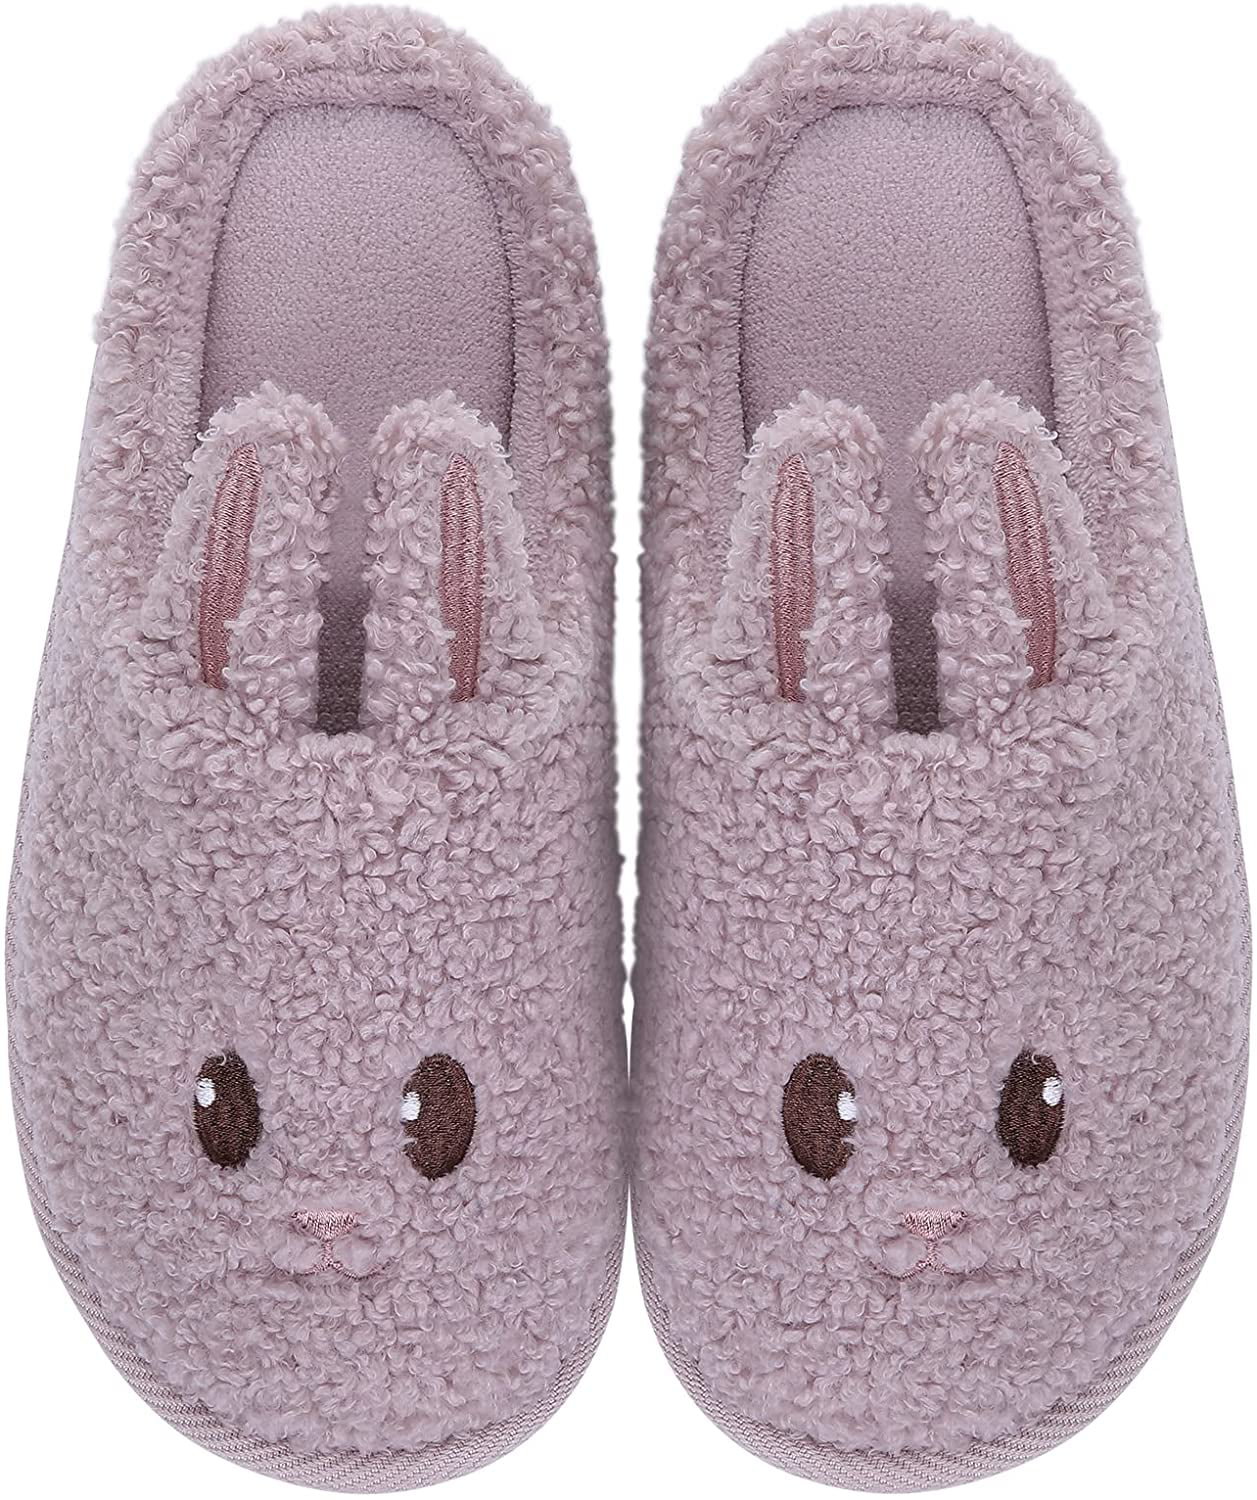 Brown 1-2 US Slumberzzz Childrens/Kids Sloth Slippers